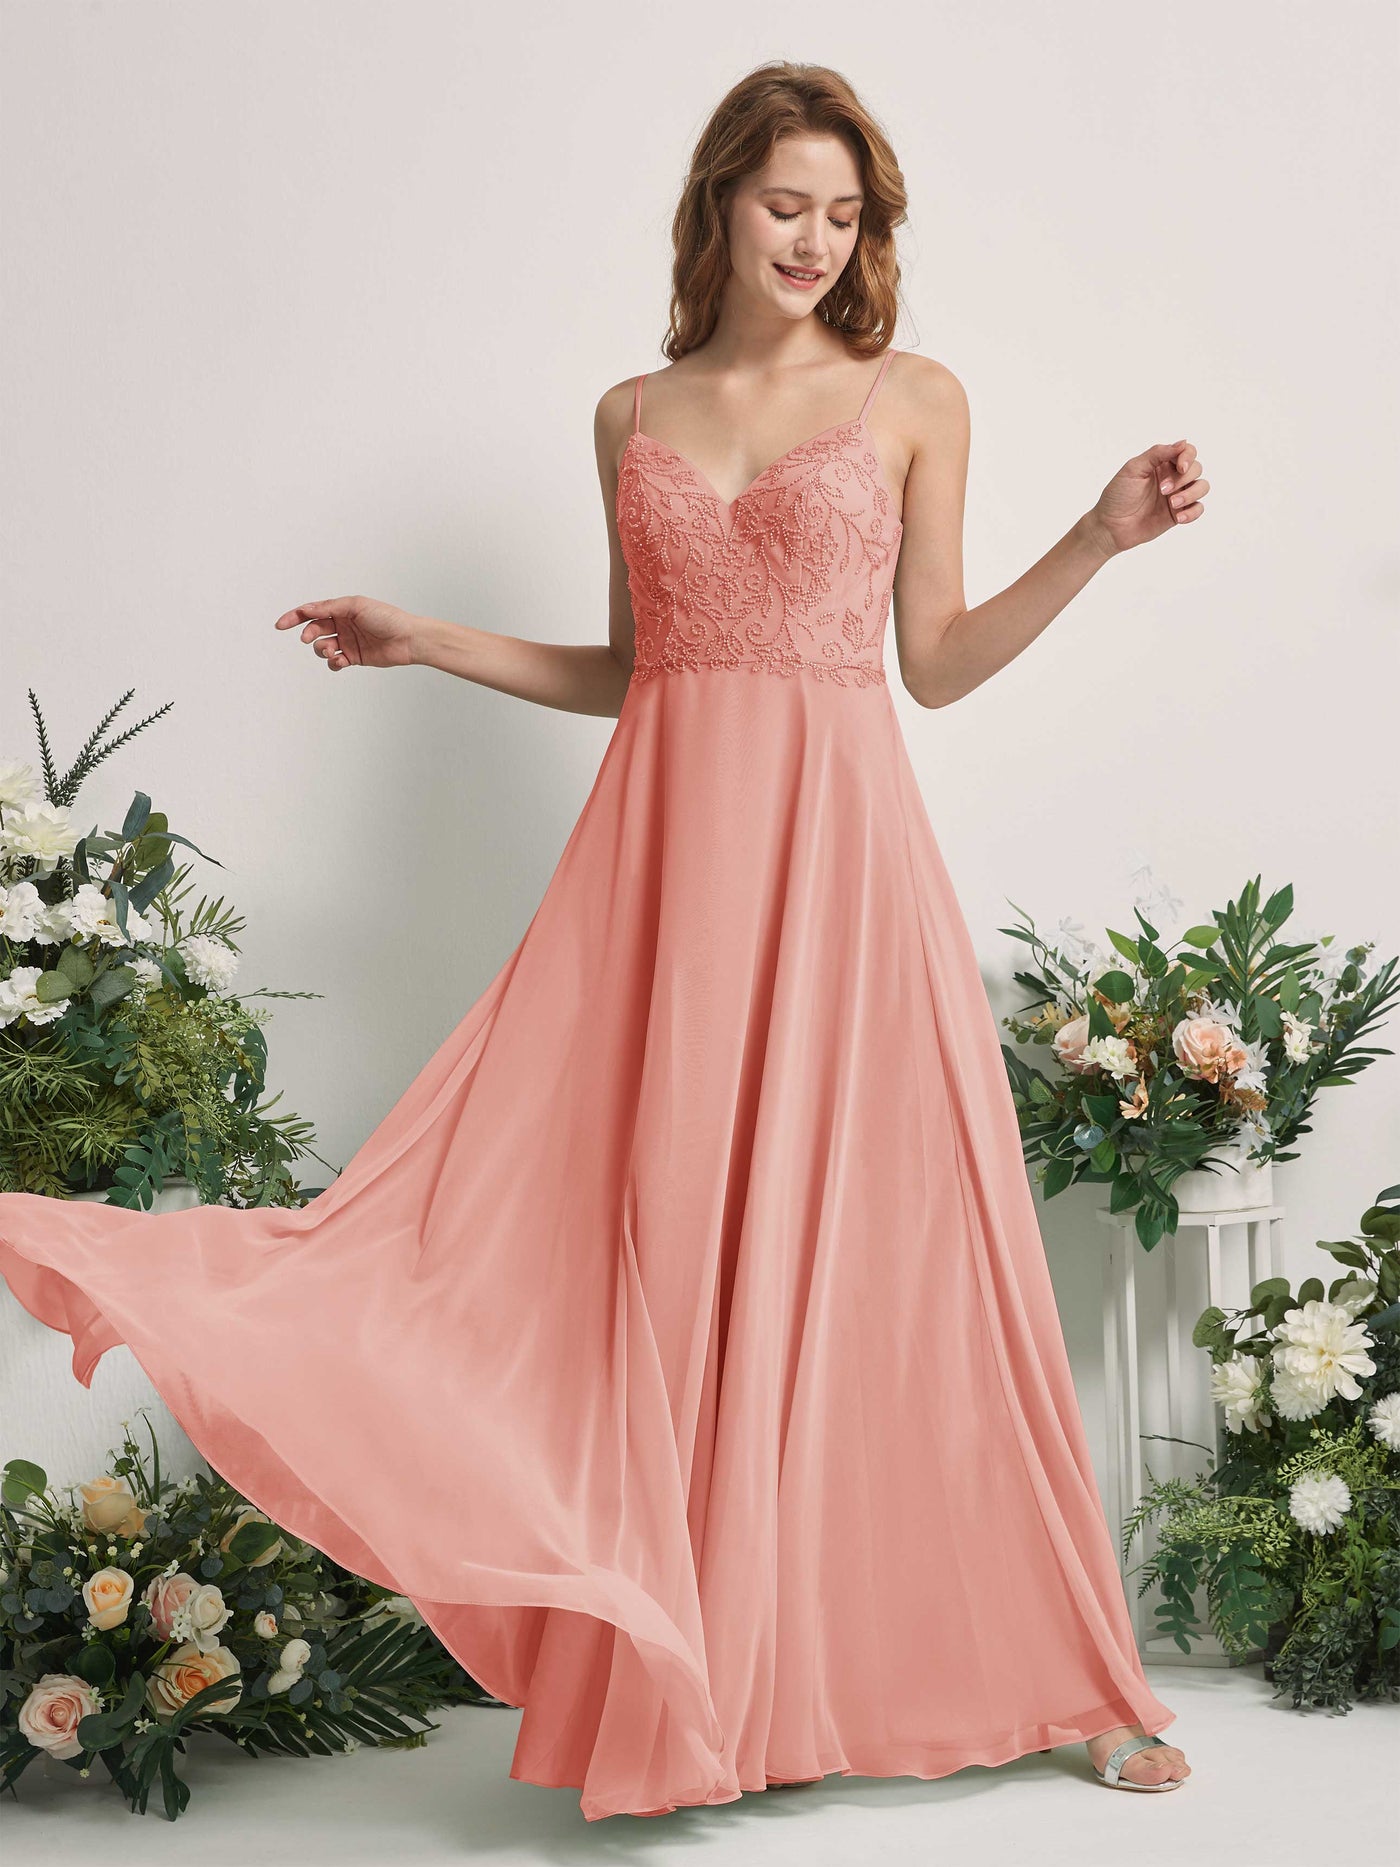 Champagne Rose Bridesmaid Dresses A-line Open back Spaghetti-straps Sleeveless Dresses (83221106)#color_champagne-rose